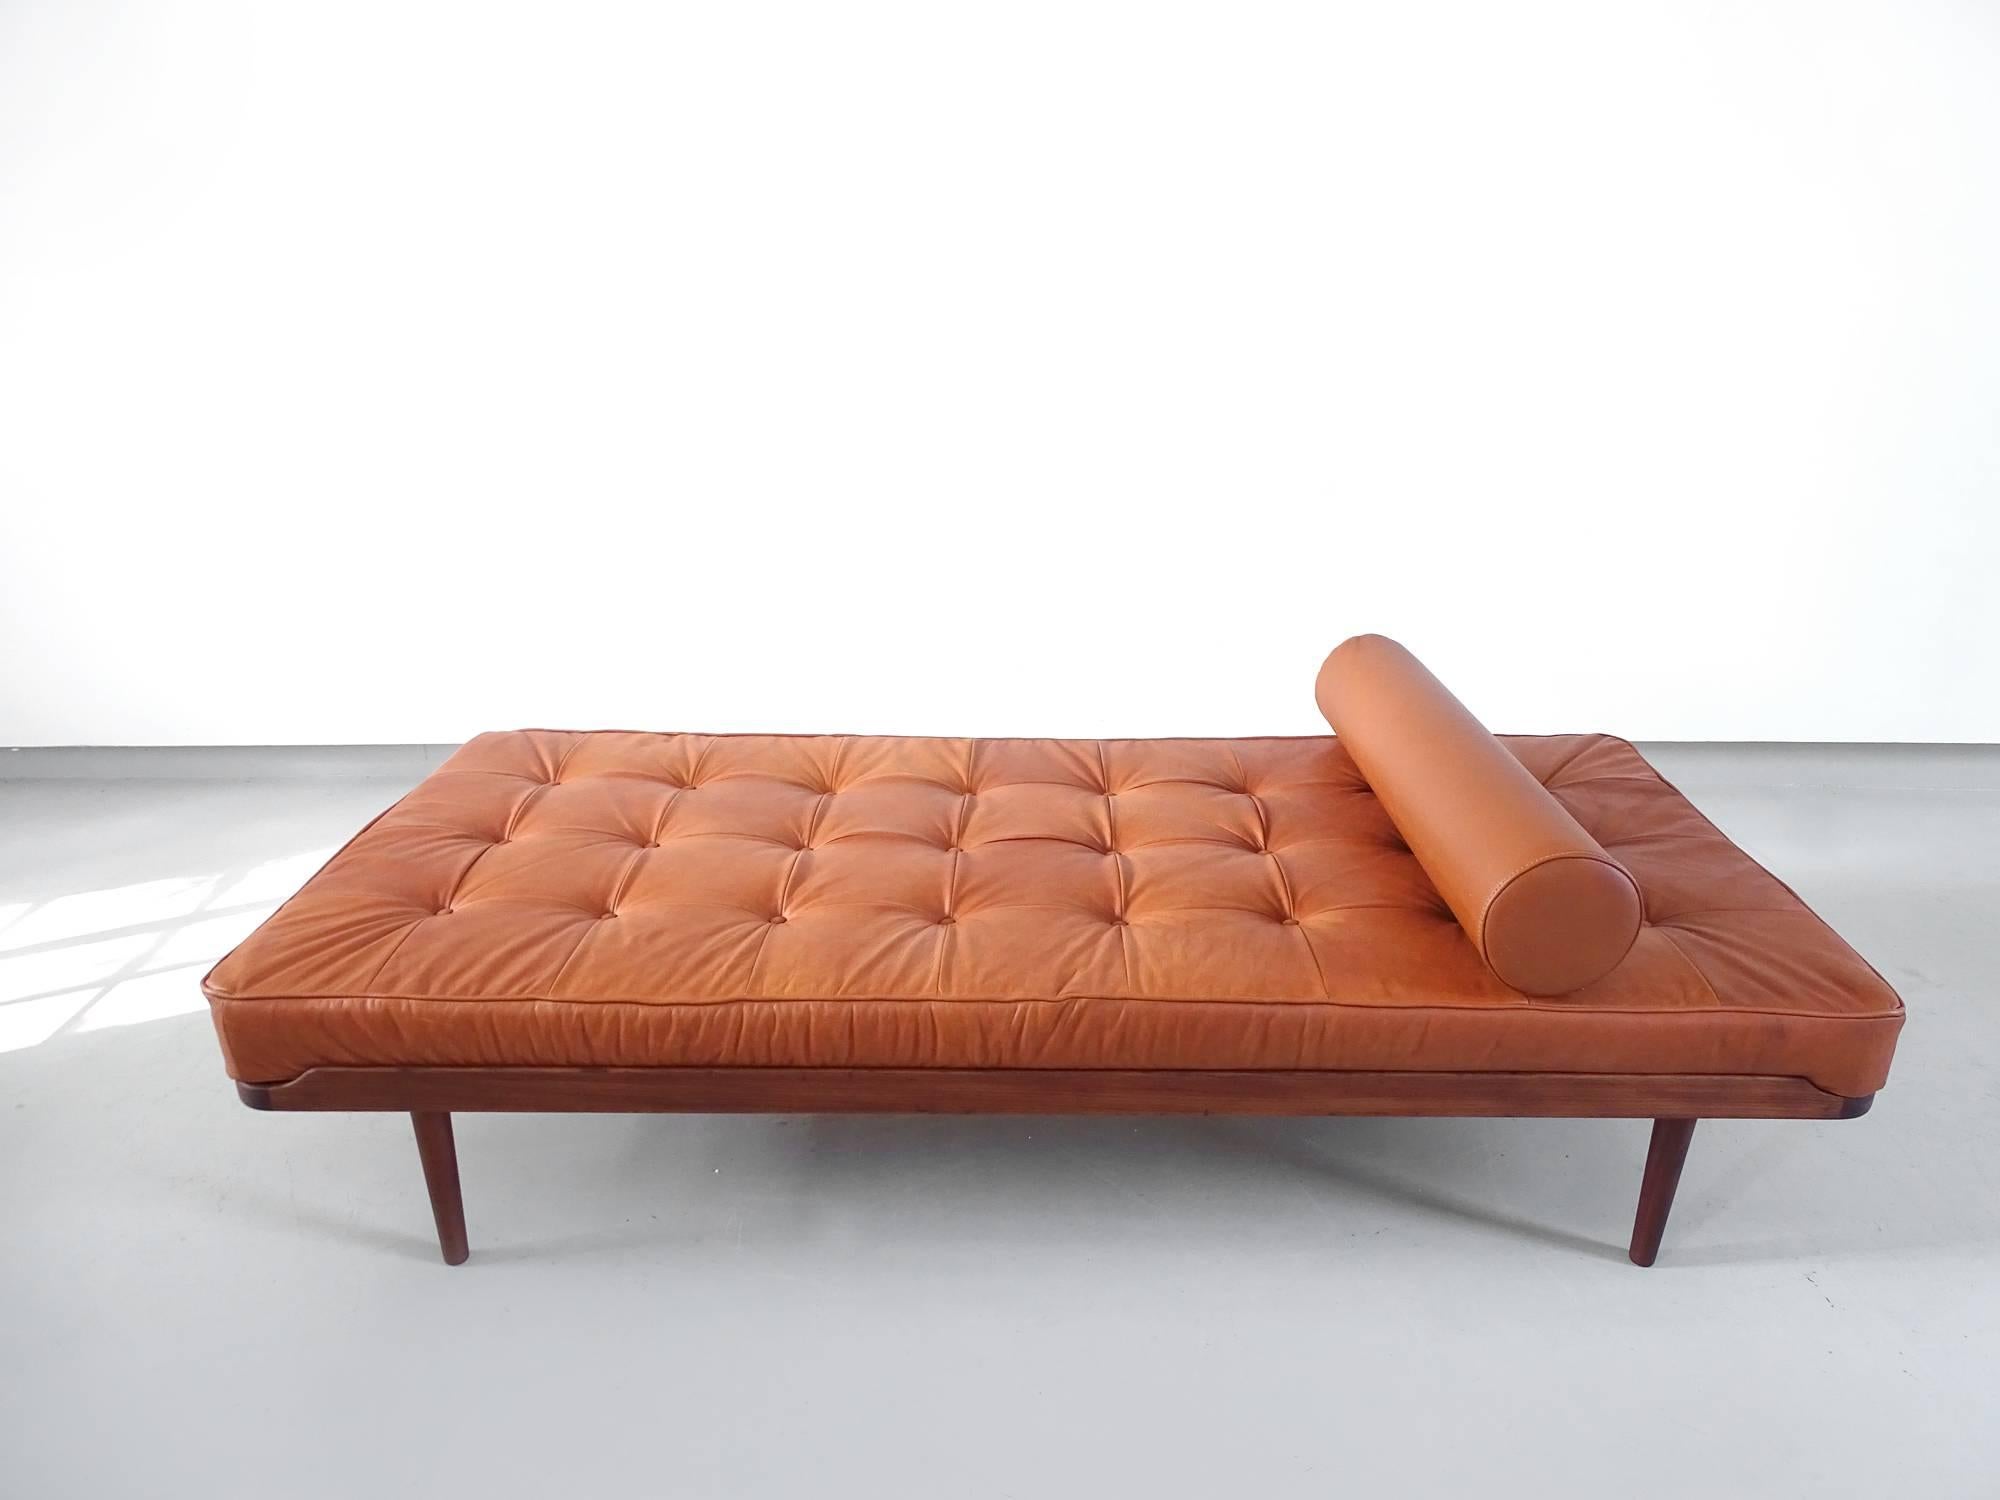 Danish Grete Jalk Daybed in Teak and Cognac Leather for P. Jeppesen, Denmark, 1960 For Sale